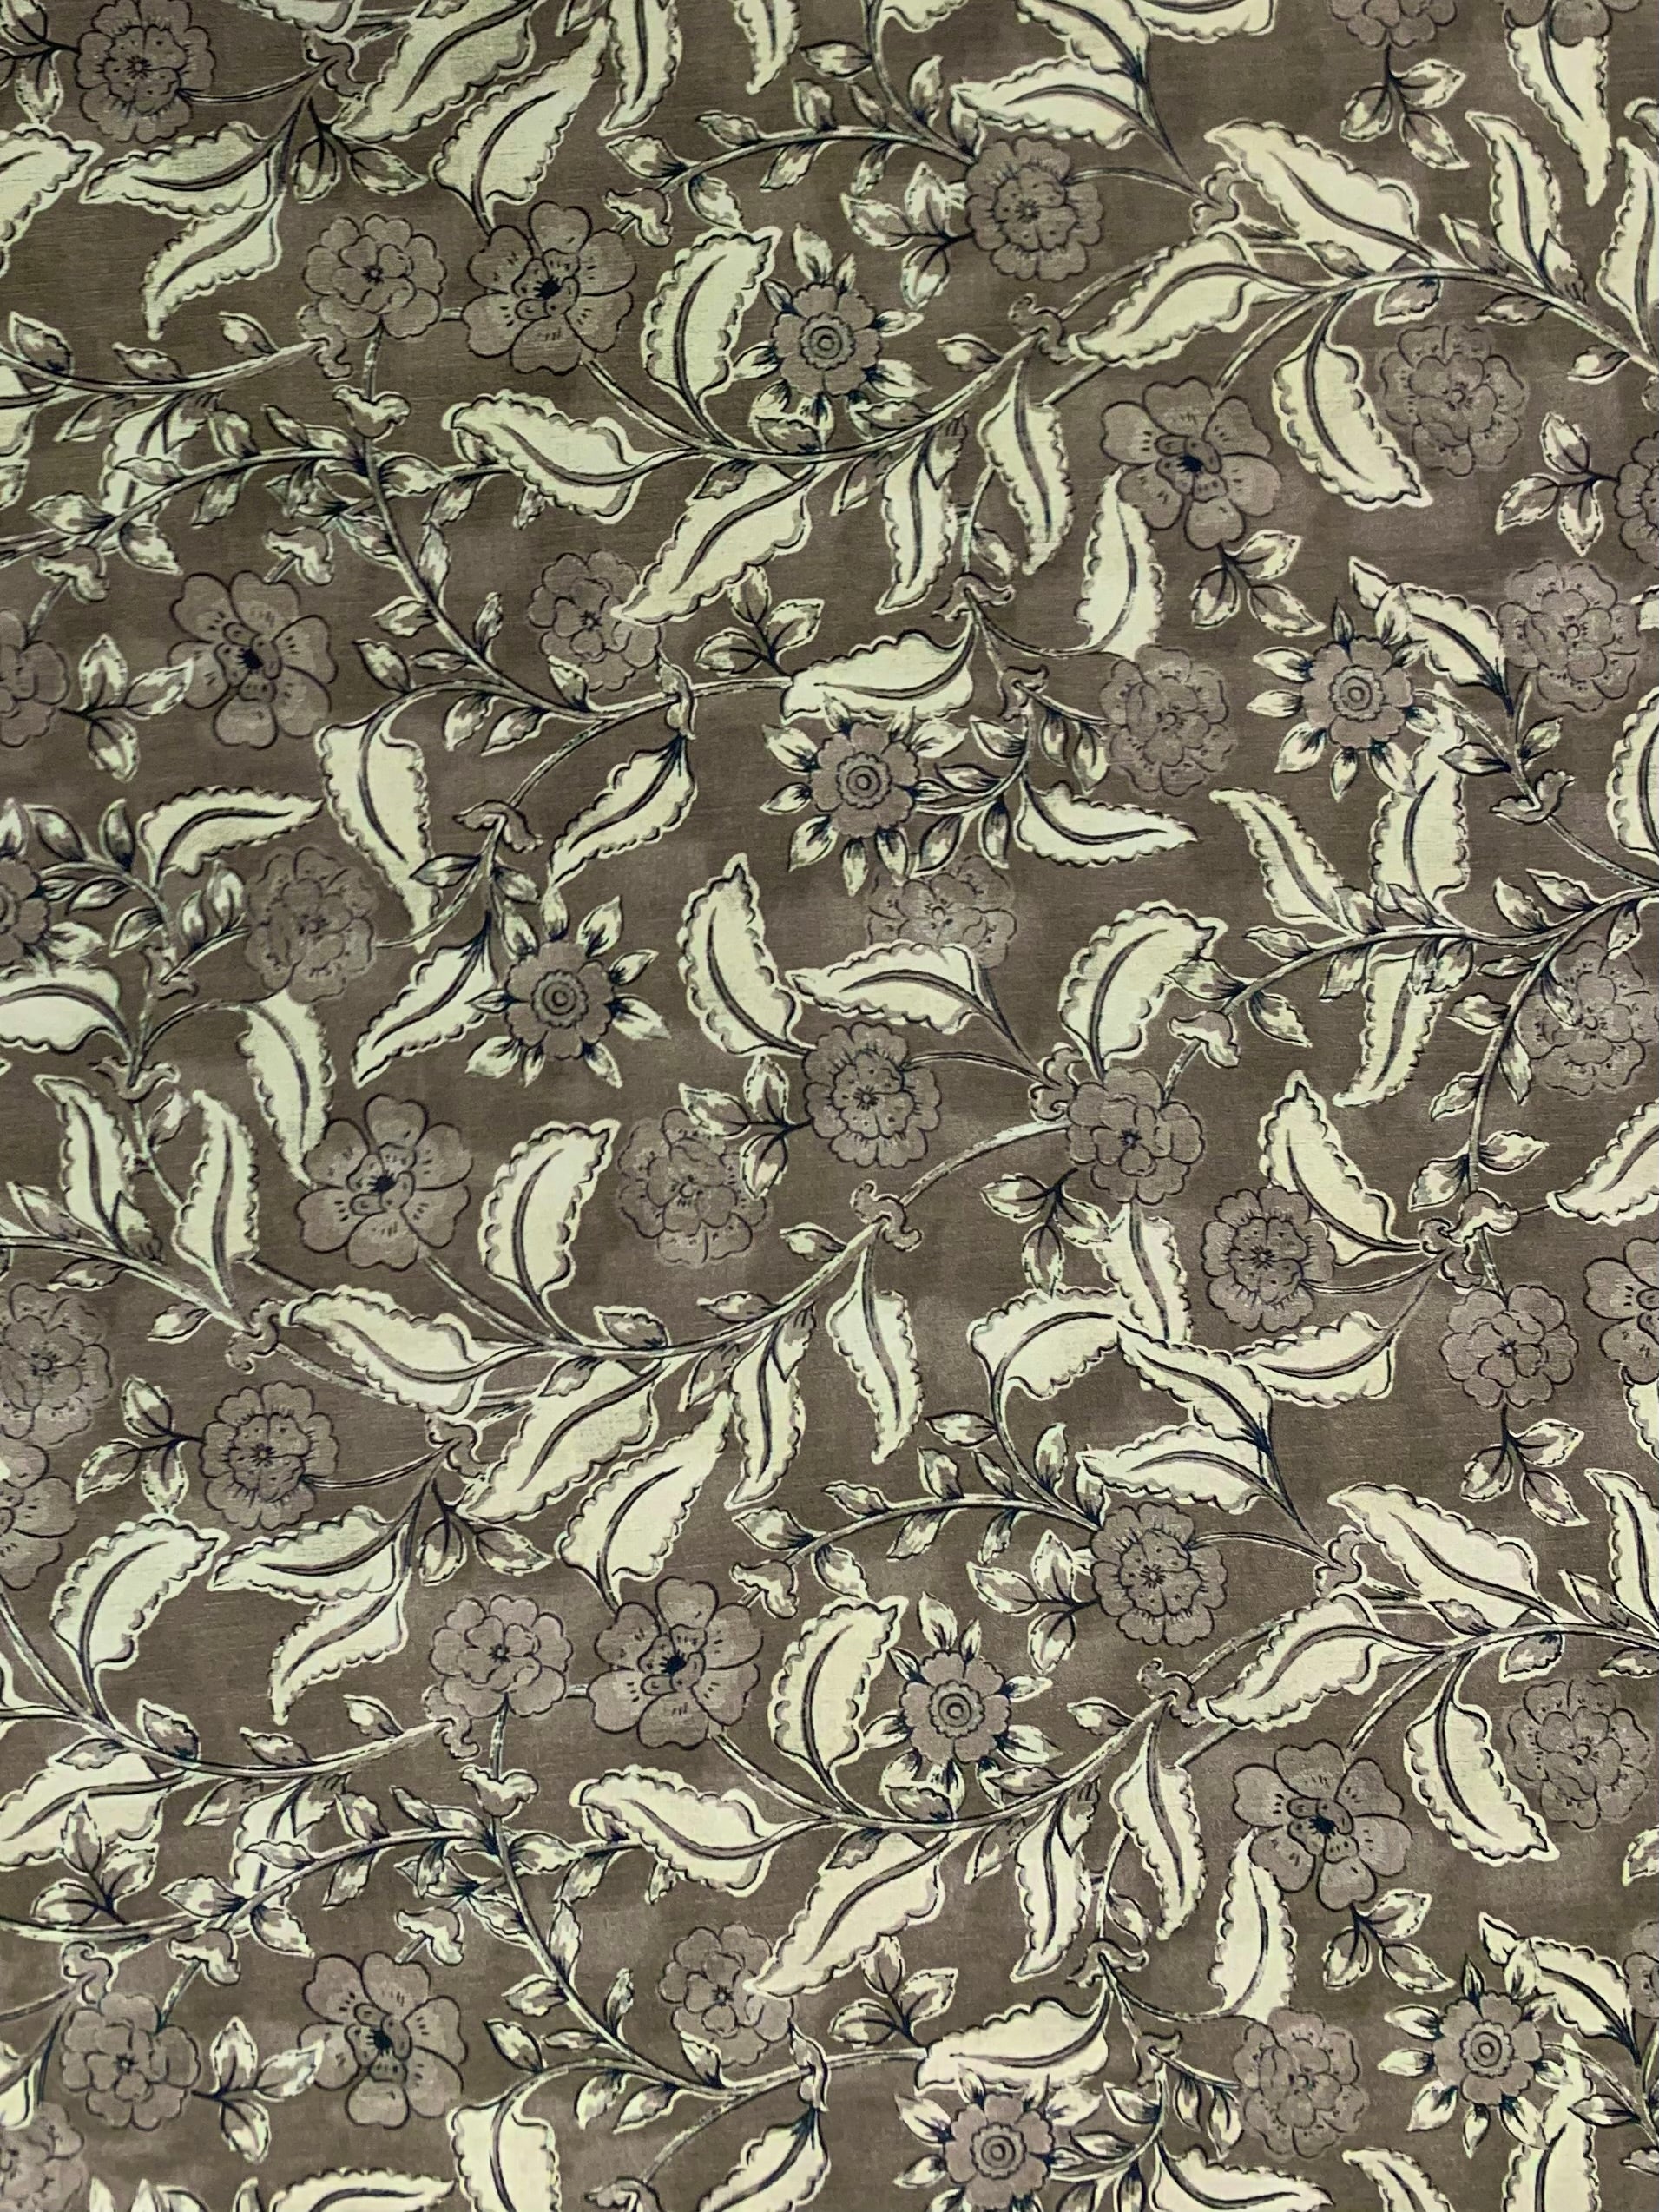 Viscose challis fabric in a Vintage Olive/Taupe floral print.